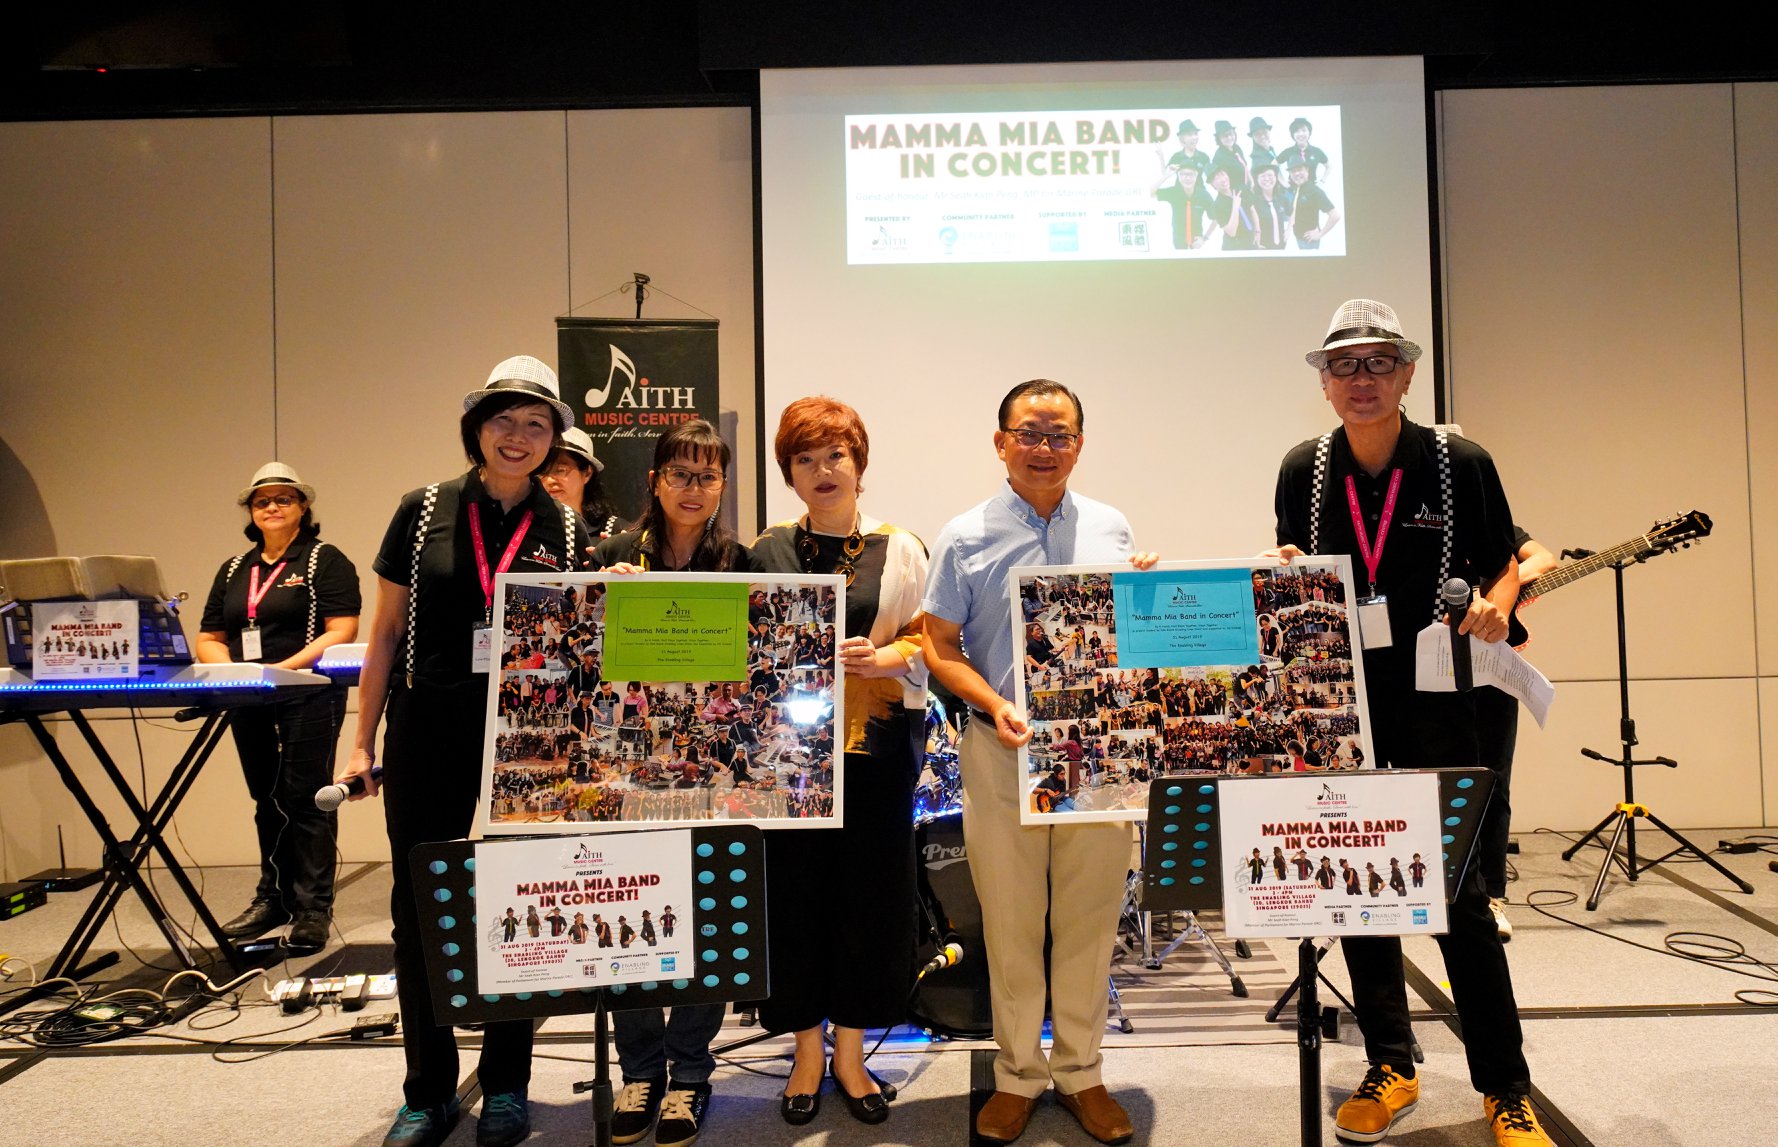 Photograph of Mamma Mia Band, Ms Koon Im Guek, Head of Enabling Lives Initiative Grant Team and Mr Seah Kian Peng, MP for Marine Parade GRC and Chairman of the Government Parliament Committee for Ministry of Social and Family Development.Photograph of Mamma Mia Band, Ms Koon Im Guek, Head of Enabling Lives Initiative Grant Team and Mr Seah Kian Peng, MP for Marine Parade GRC and Chairman of the Government Parliament Committee for Ministry of Social and Family Development.